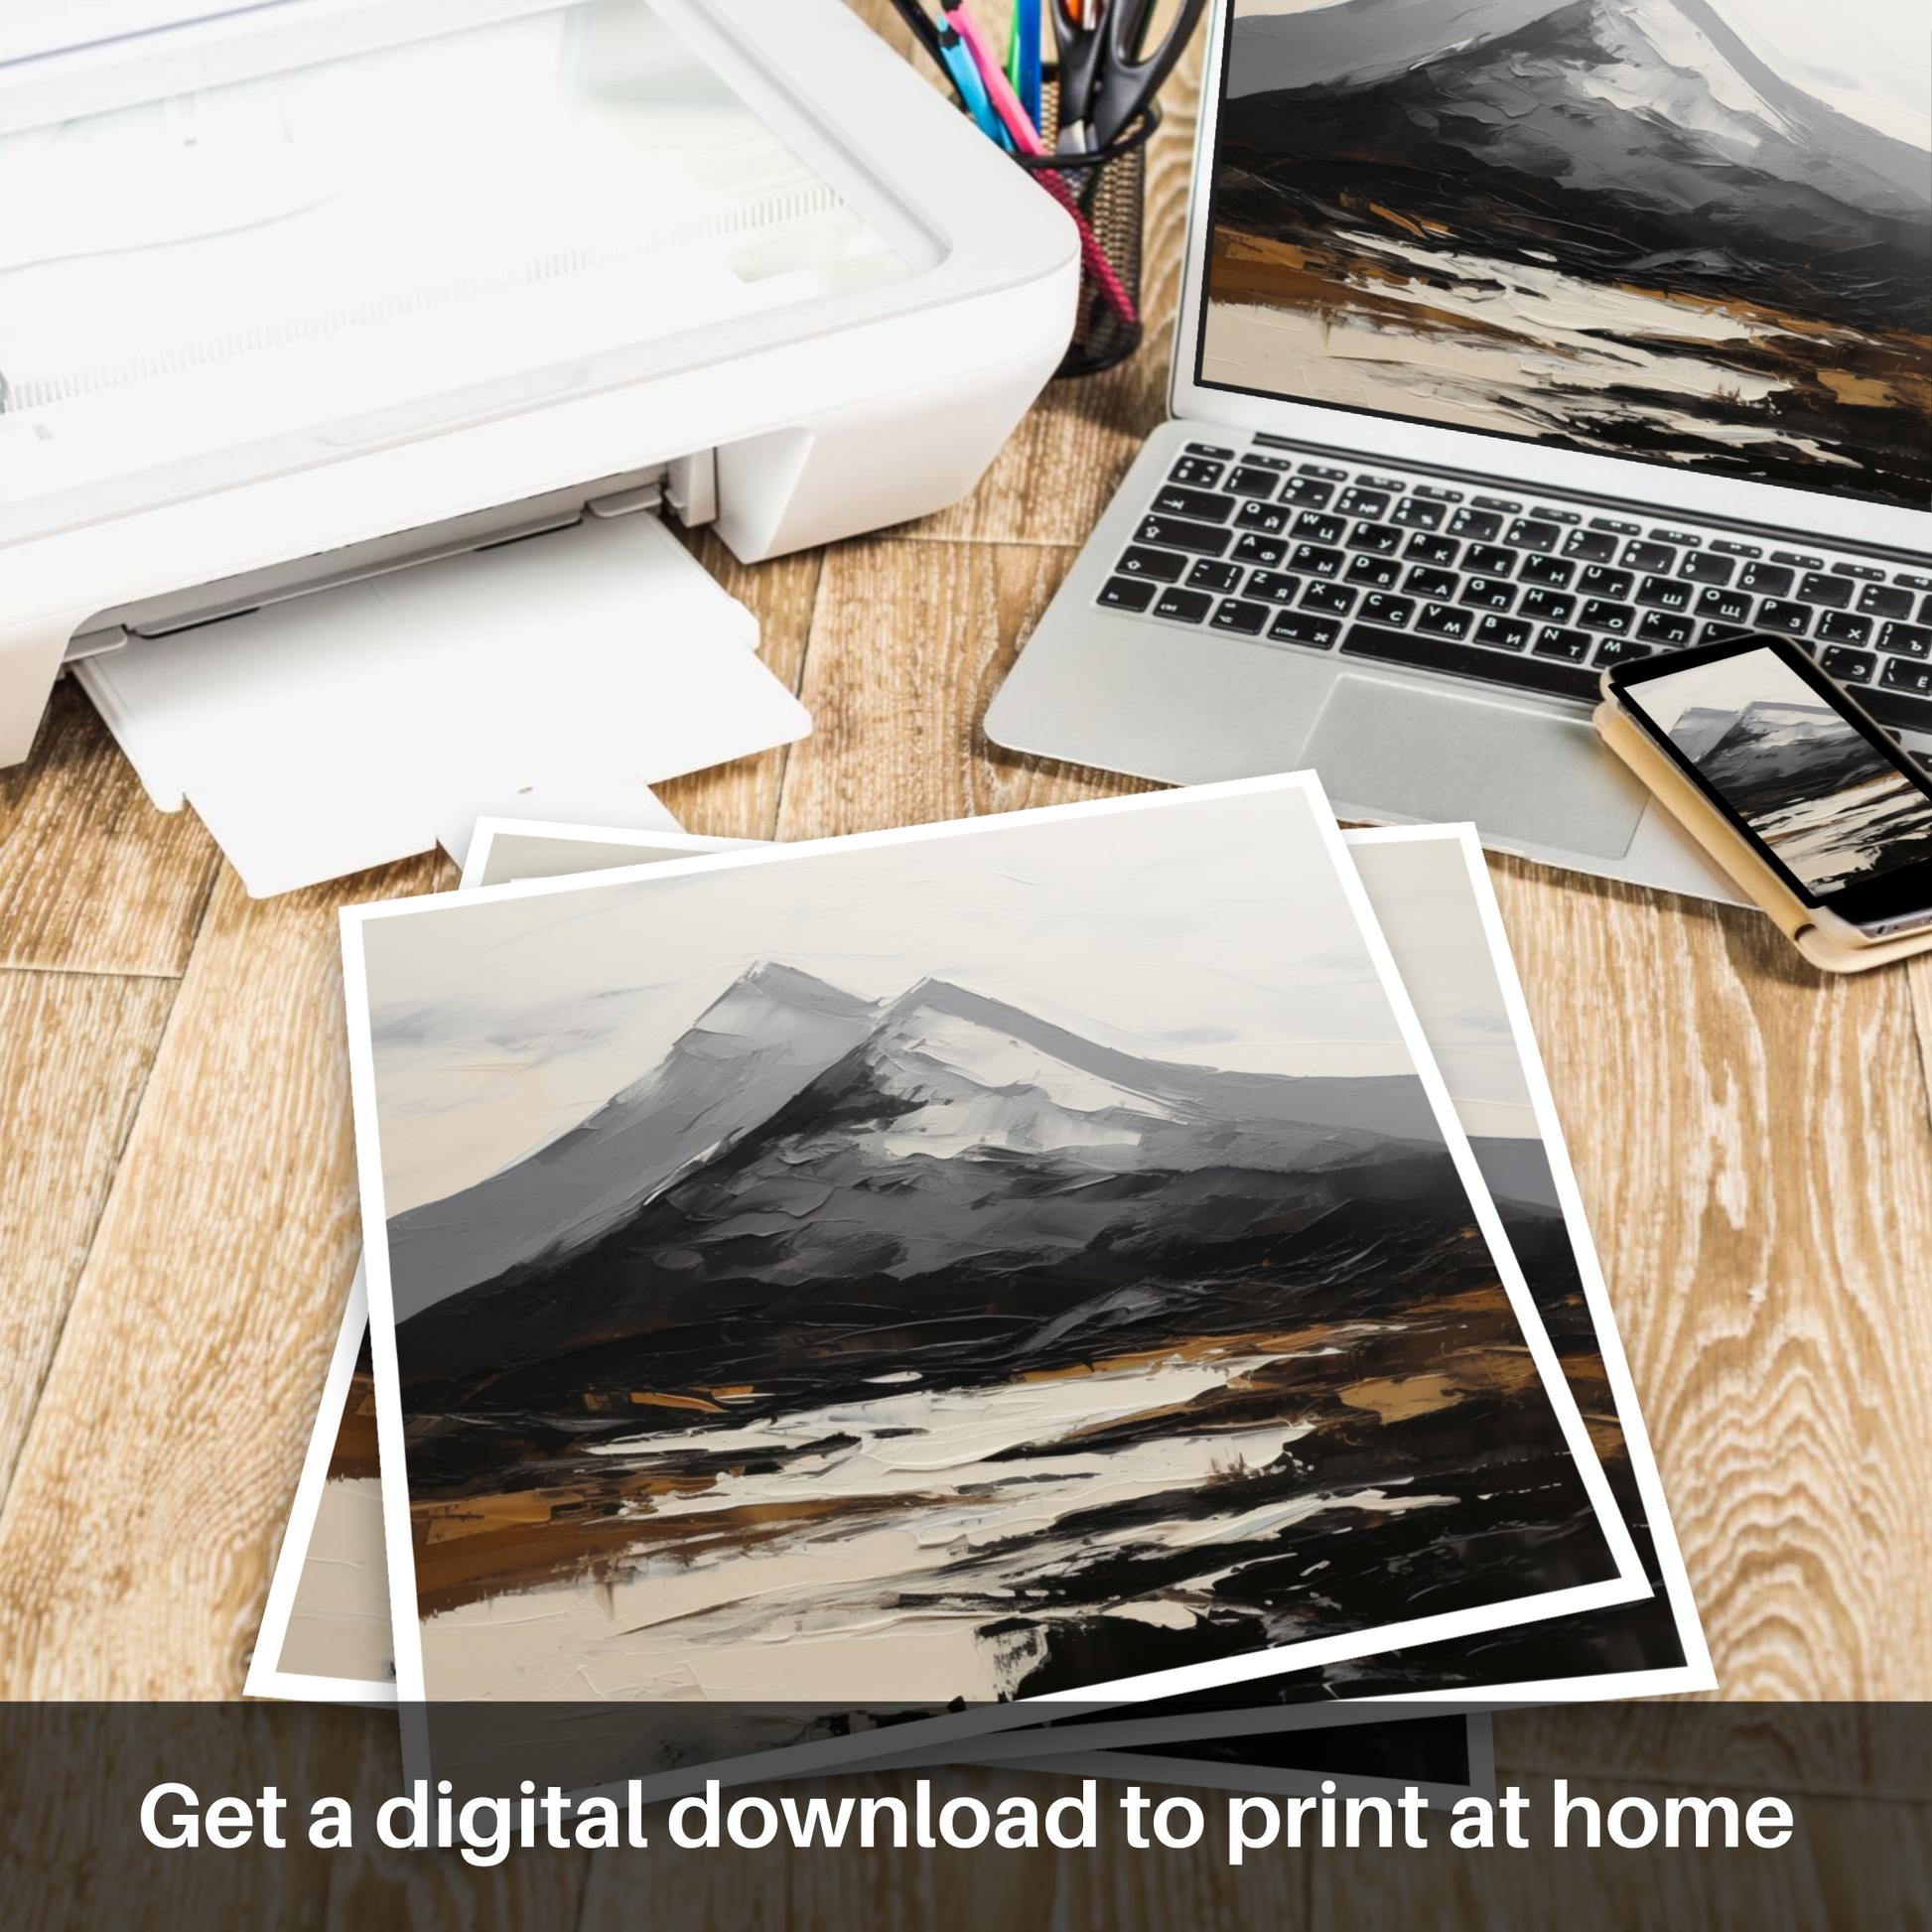 Downloadable and printable picture of Ben More